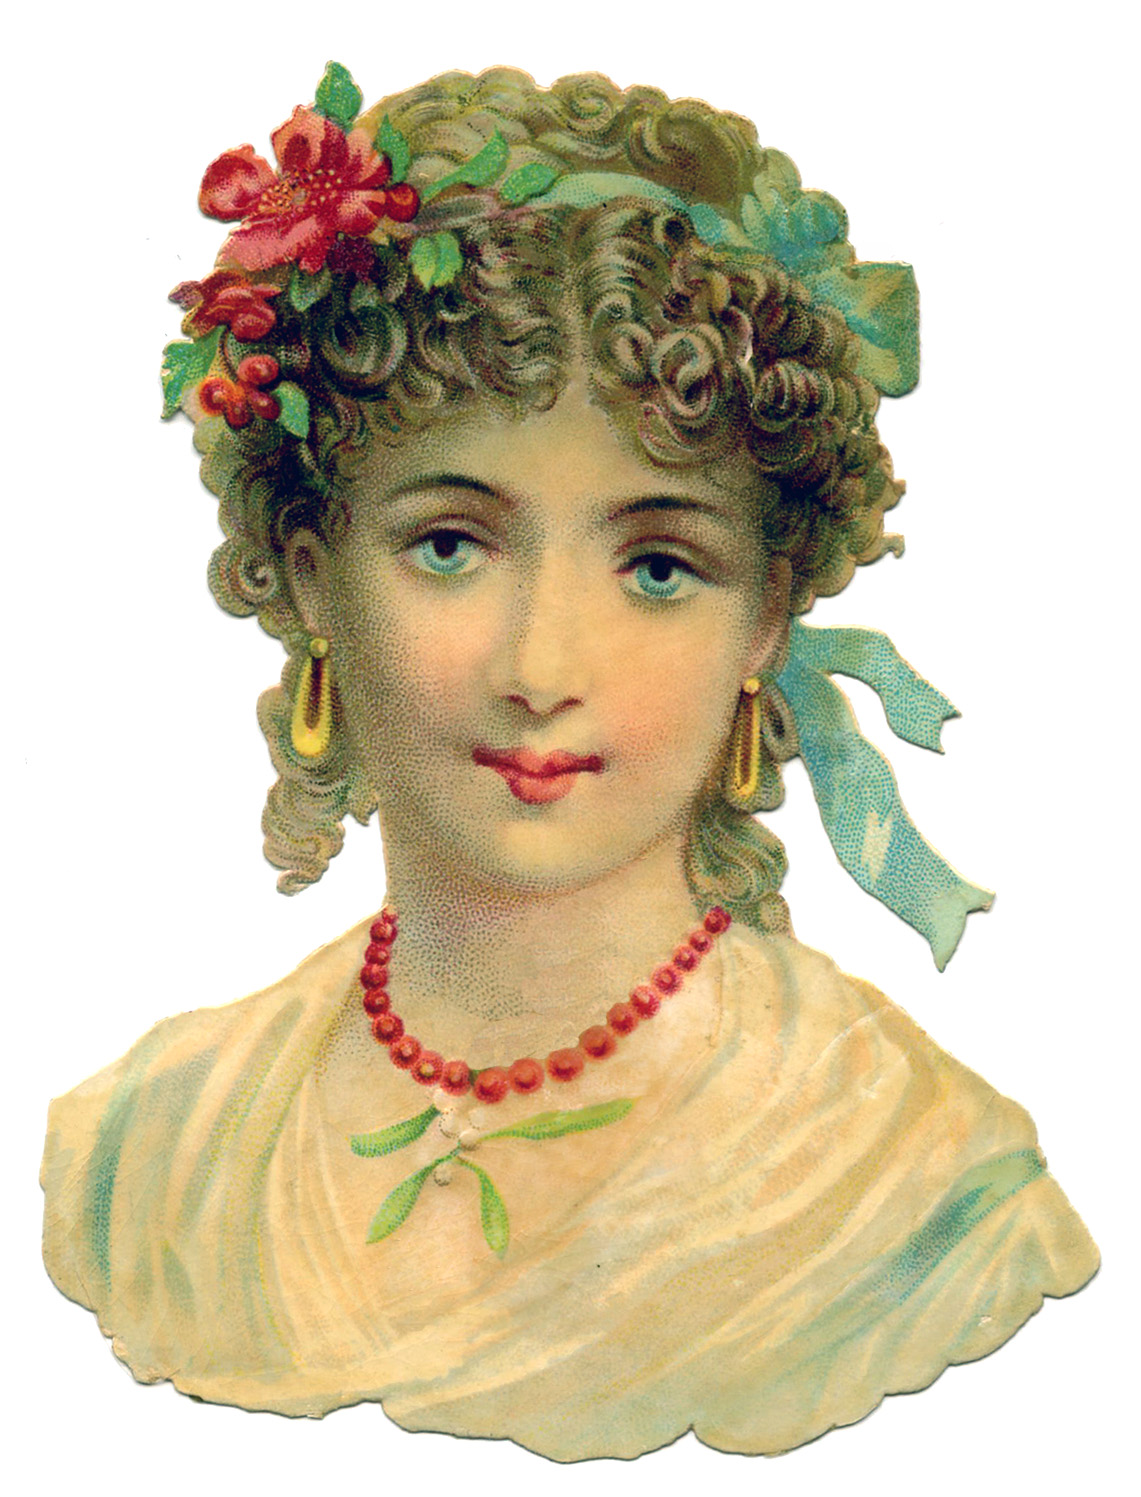 http://thegraphicsfairy.com/wp-content/uploads/blogger/-sTSvbQxpPME/T1LO-KyOzVI/AAAAAAAAQvw/9V9MQY7I9r0/s1600/lady-bust-Vintage-Image-GraphicsFairy.jpg